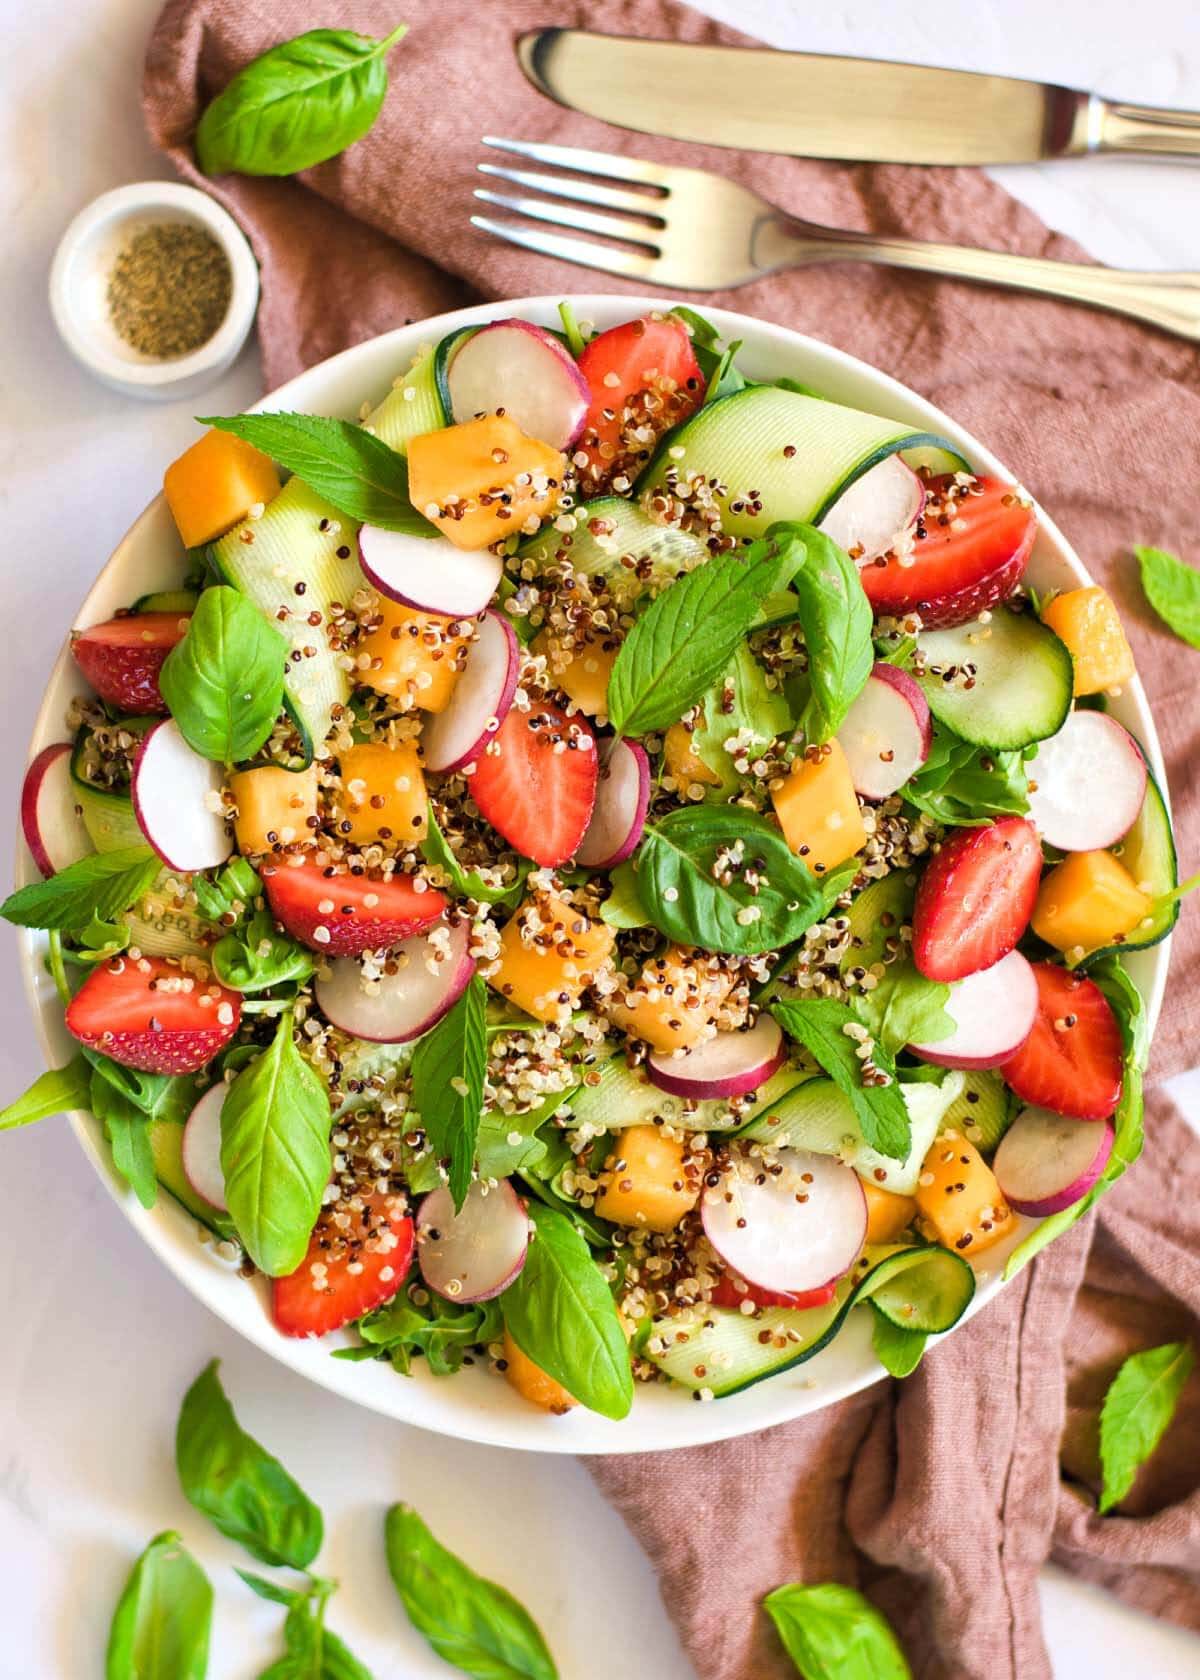 Salad with melon and strawberries in a bowl.